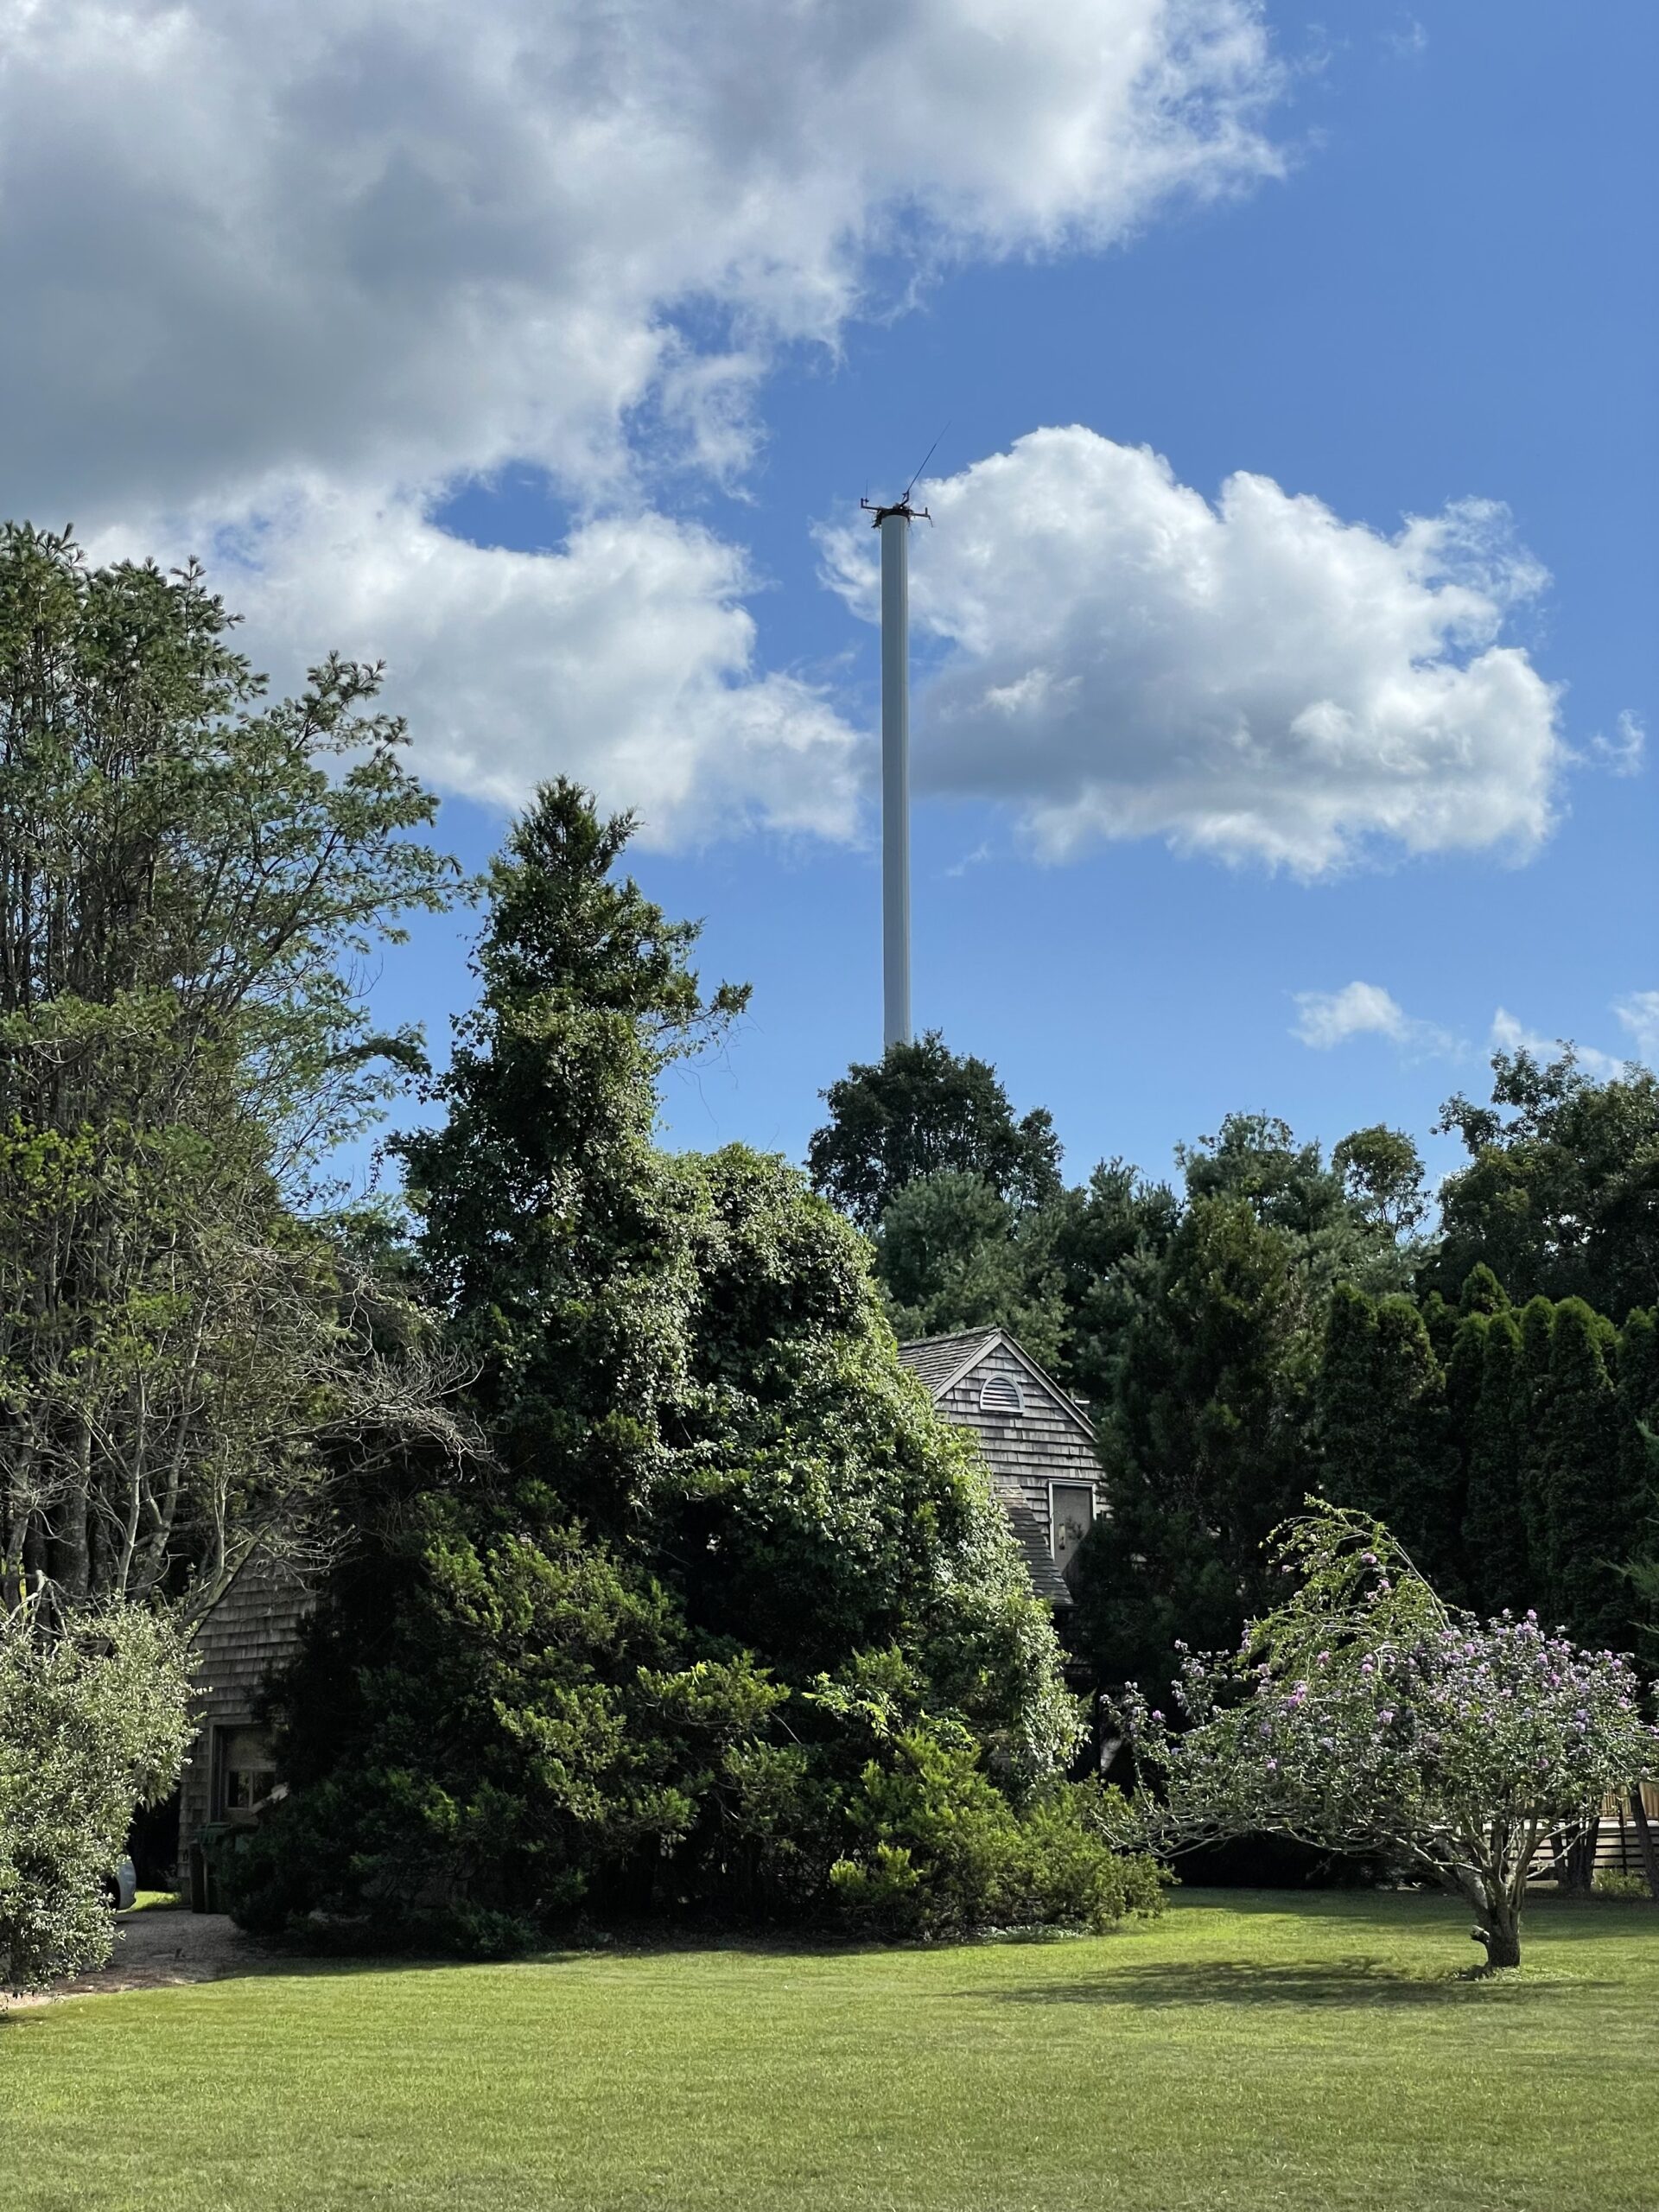 The Springs Fire District's existing tower on Fort Pond Boulevard, as seen from Talmage Farm Lane.